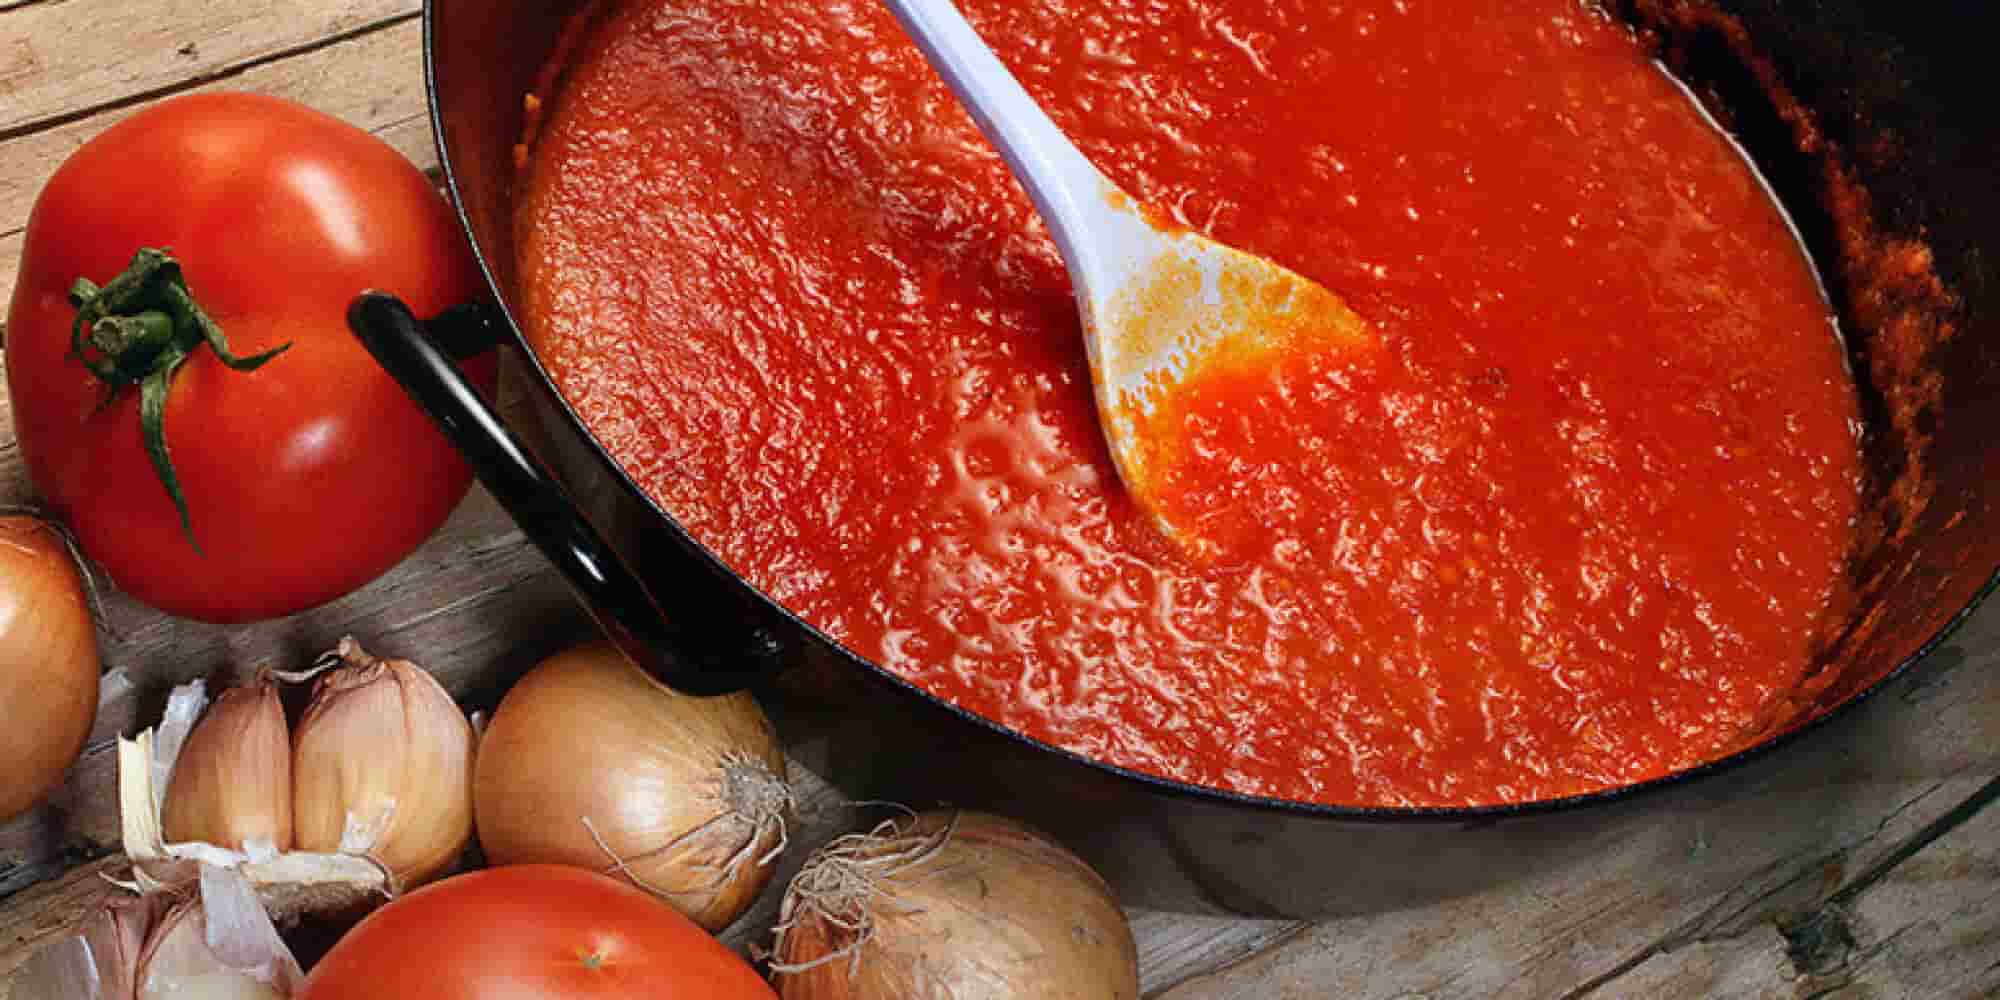 Salsa recipe for canning